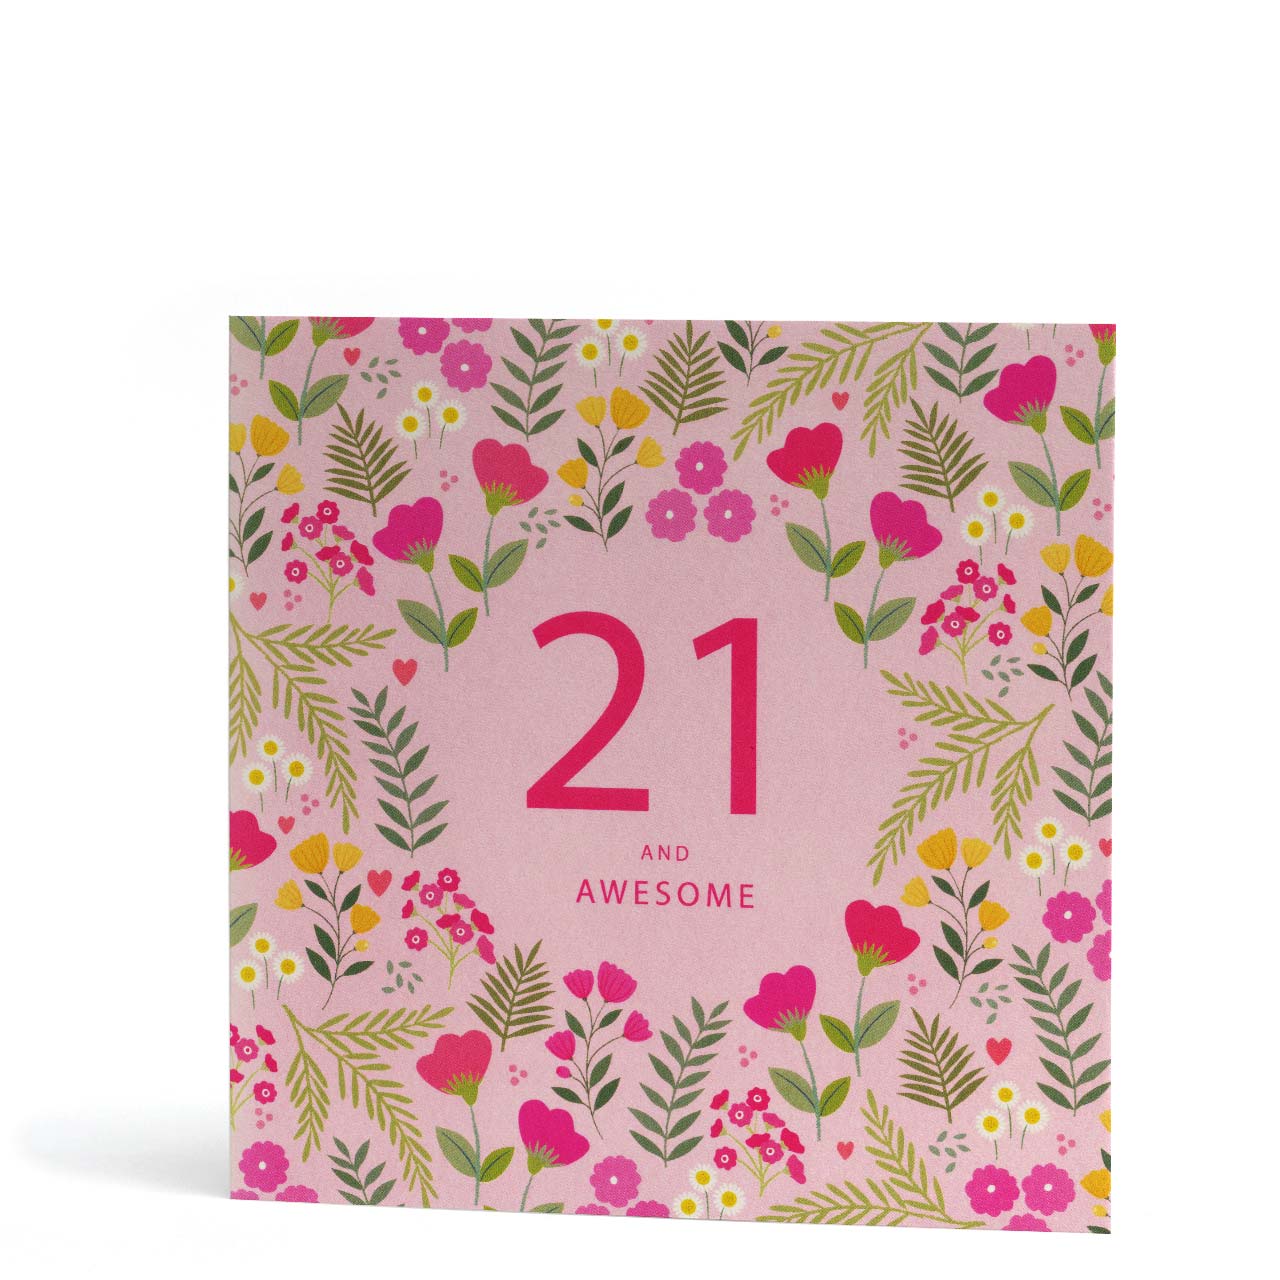 21 and Awesome Floral Birthday Card